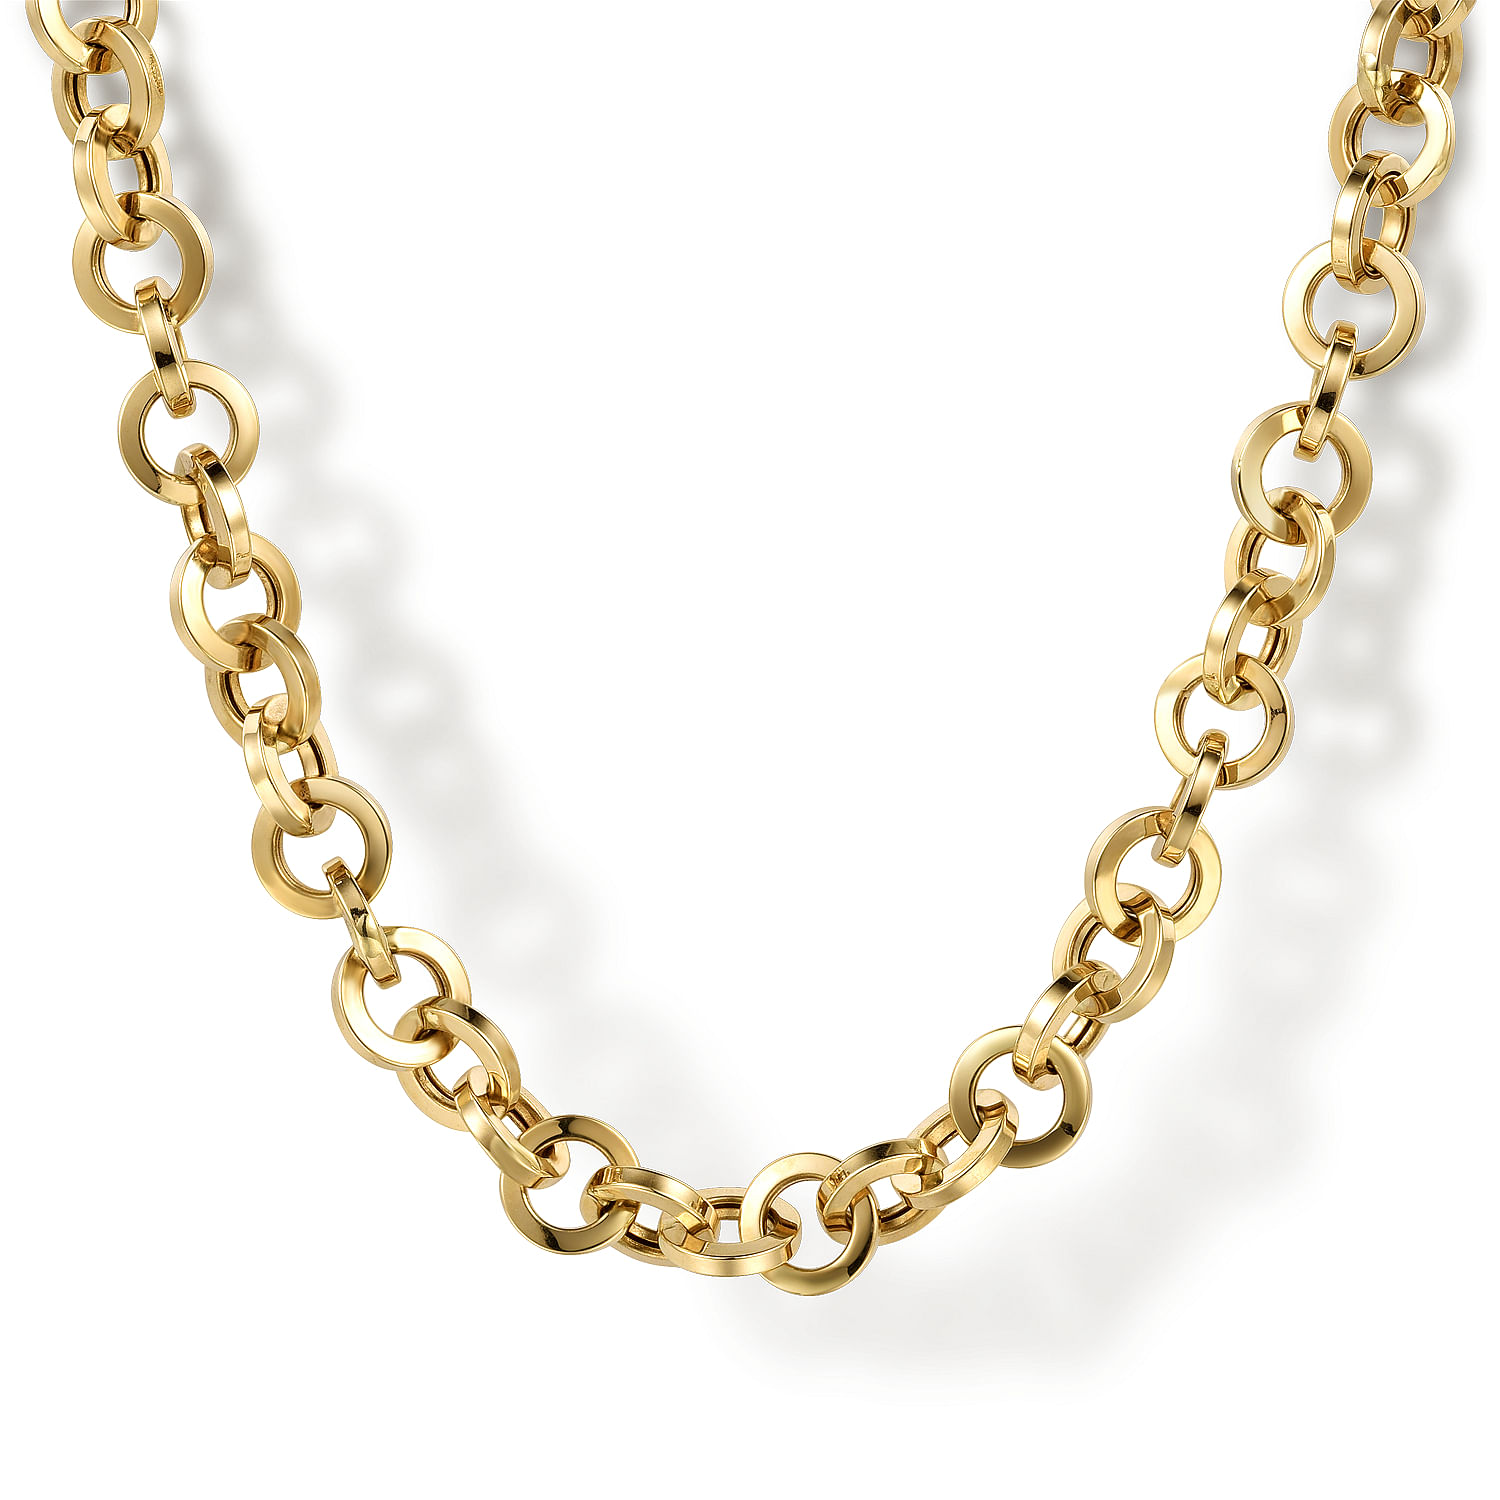 24 Inch 14K Yellow Gold Hollow Link Chain Necklace